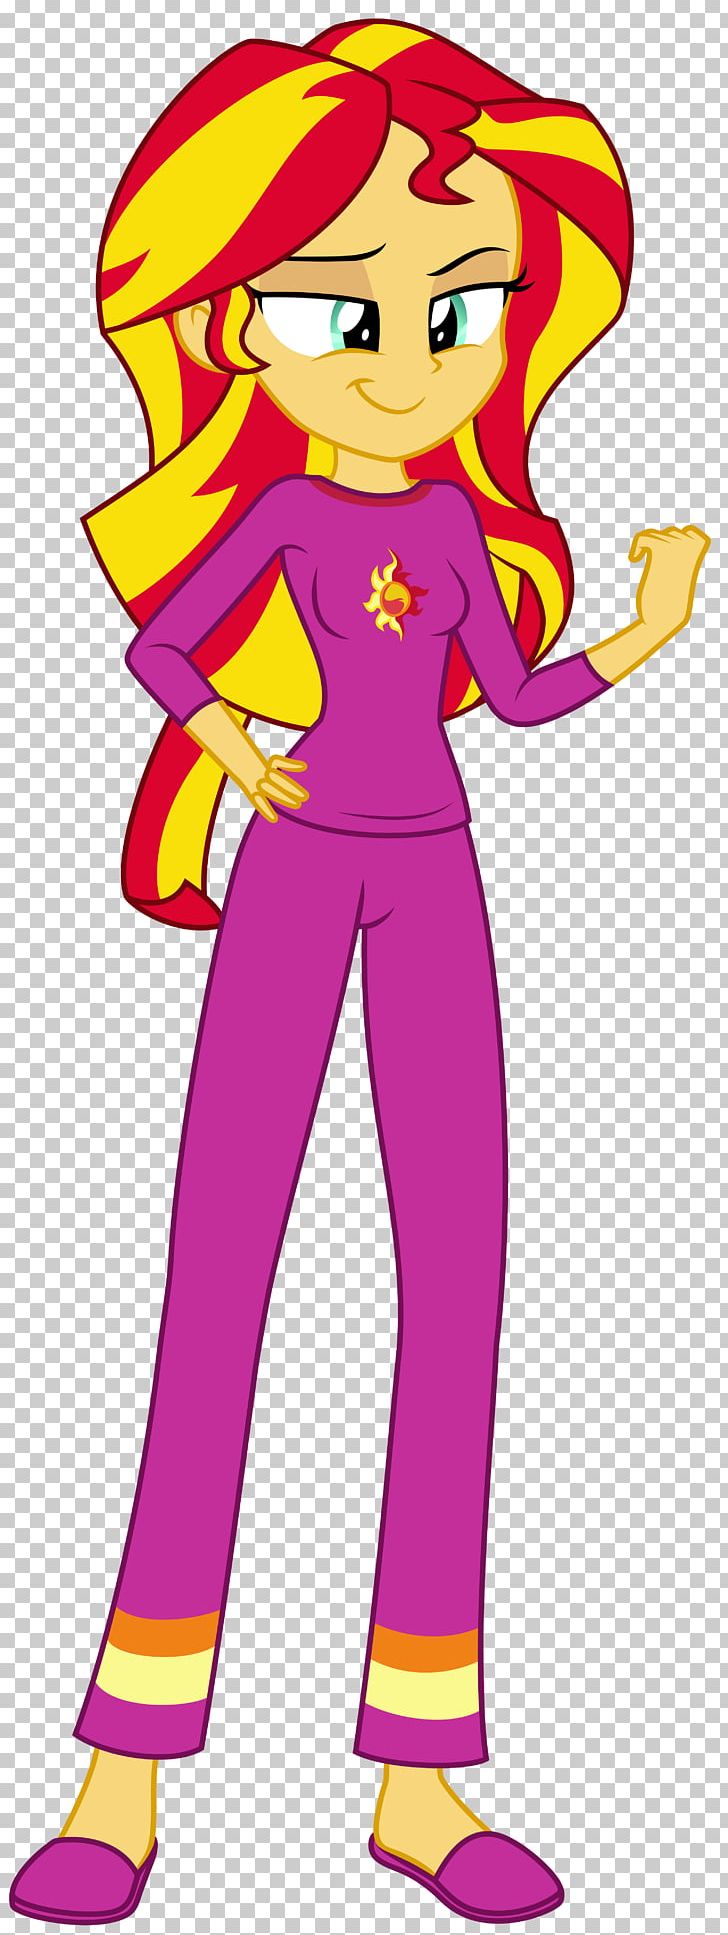 Twilight Sparkle Sunset Shimmer My Little Pony Equestria PNG, Clipart, Art, Cartoon, Equestria, Fictional Character, Girl Free PNG Download